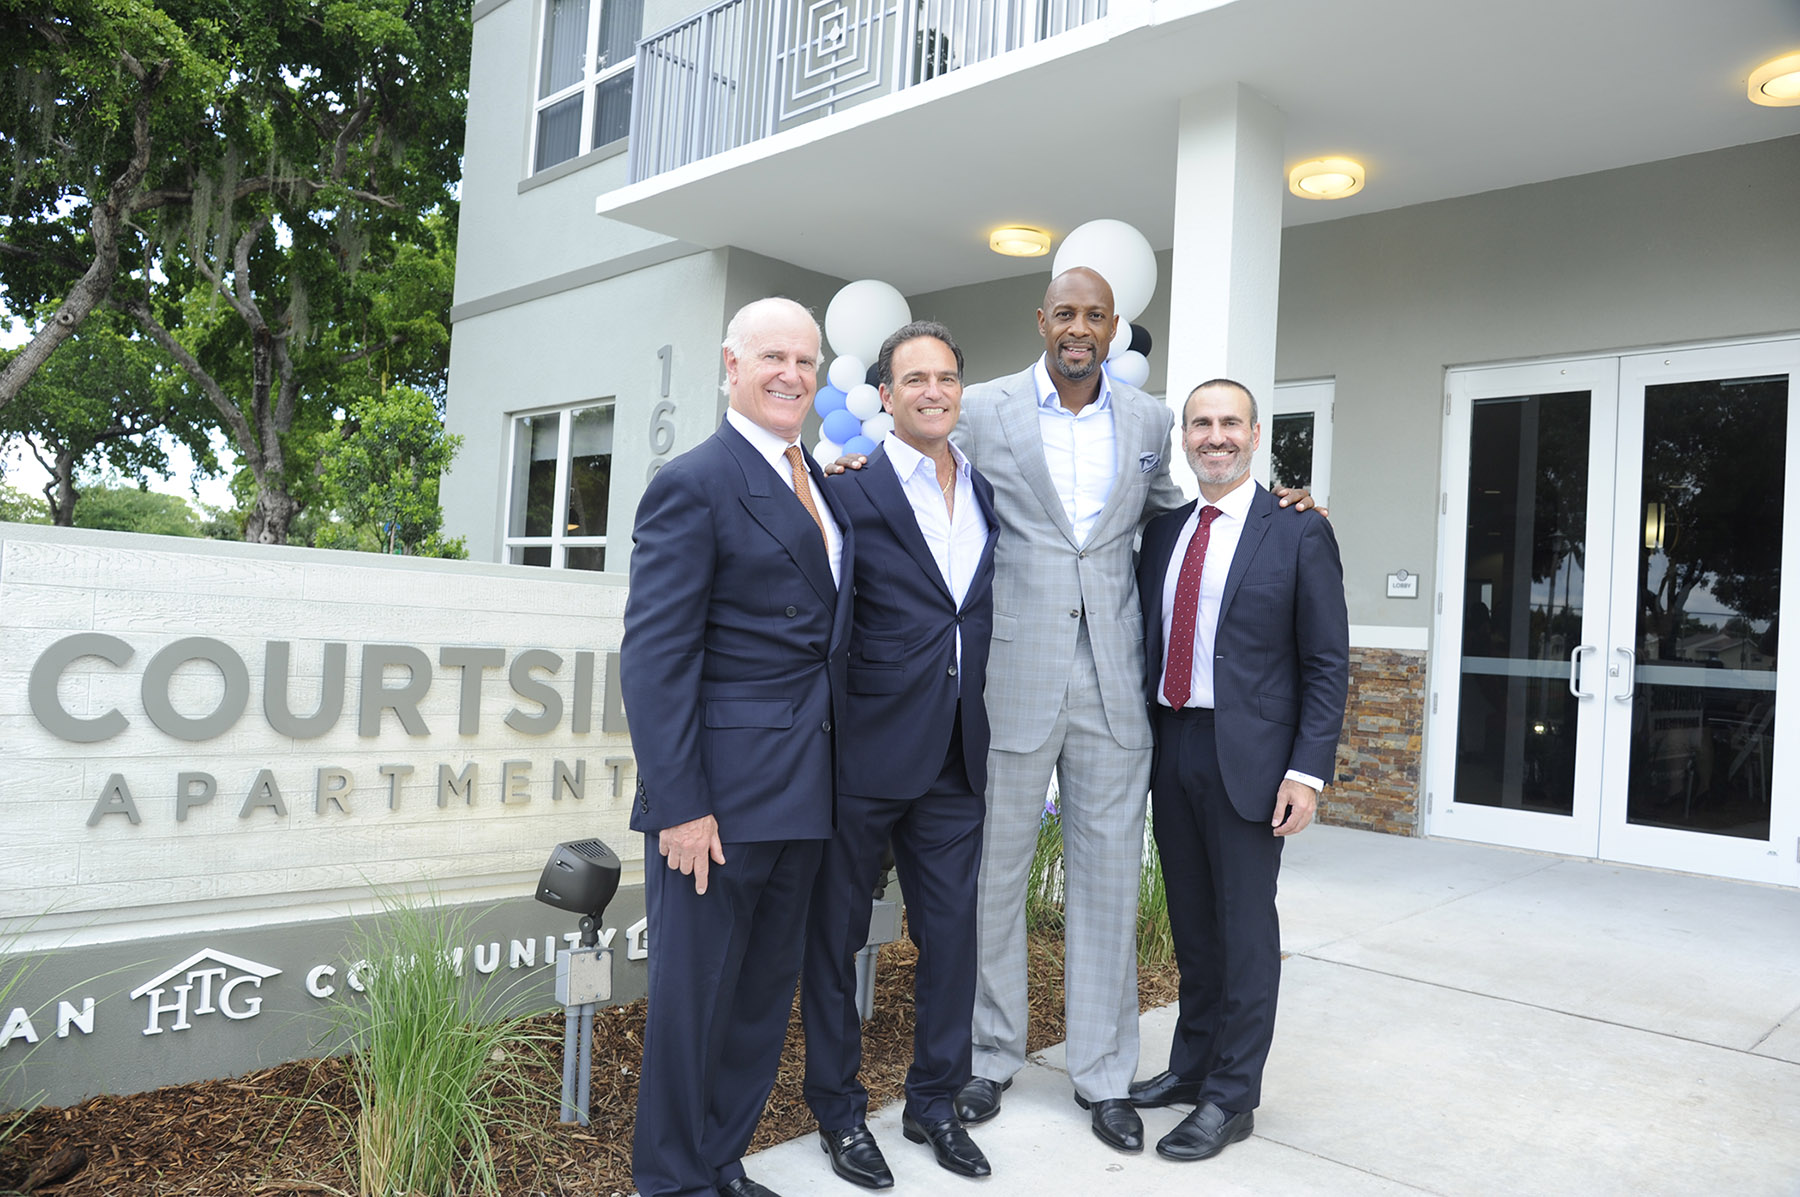 Randy Rieger, Allen Furst, Alonzo Mourning, and Matthew Rieger in front of a grey affordable housing complex in Overtown